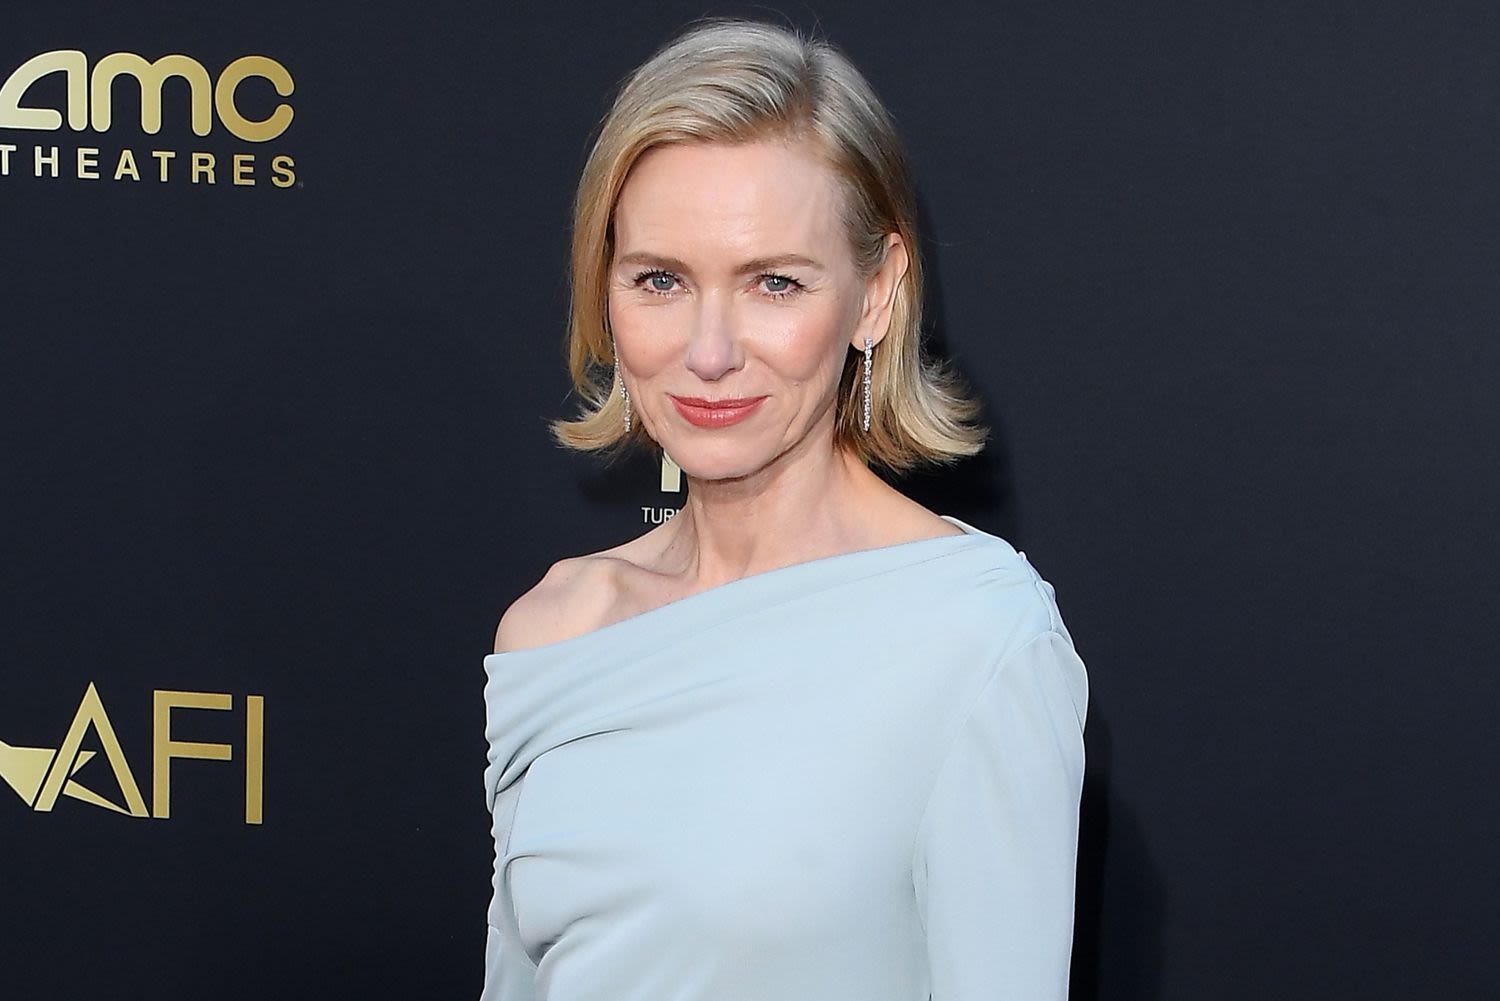 Naomi Watts Recalls 'Awkward' Audition Where She Had to Make Out with a 'Very Well-Known Actor'